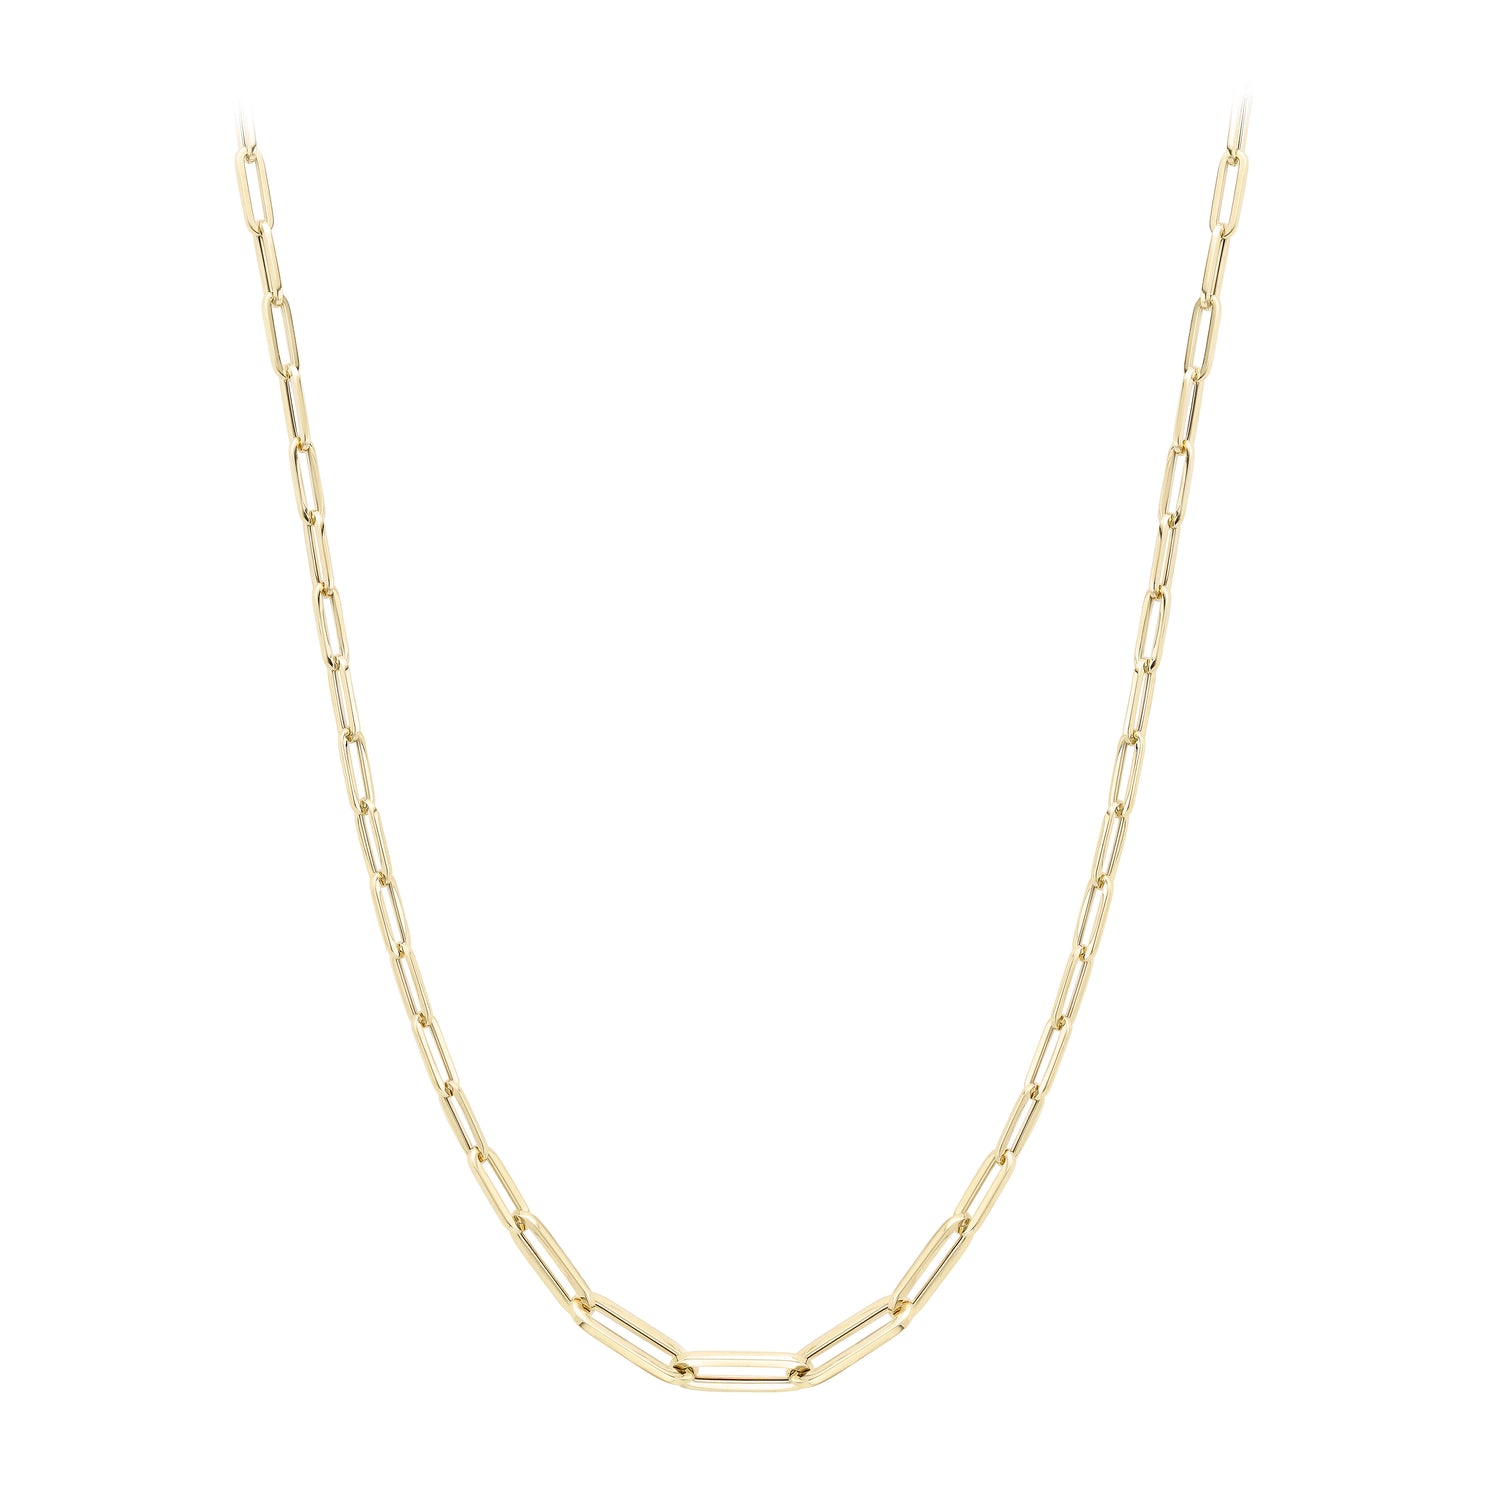 9ct. Yellow Gold Graduated Oval Link Necklet